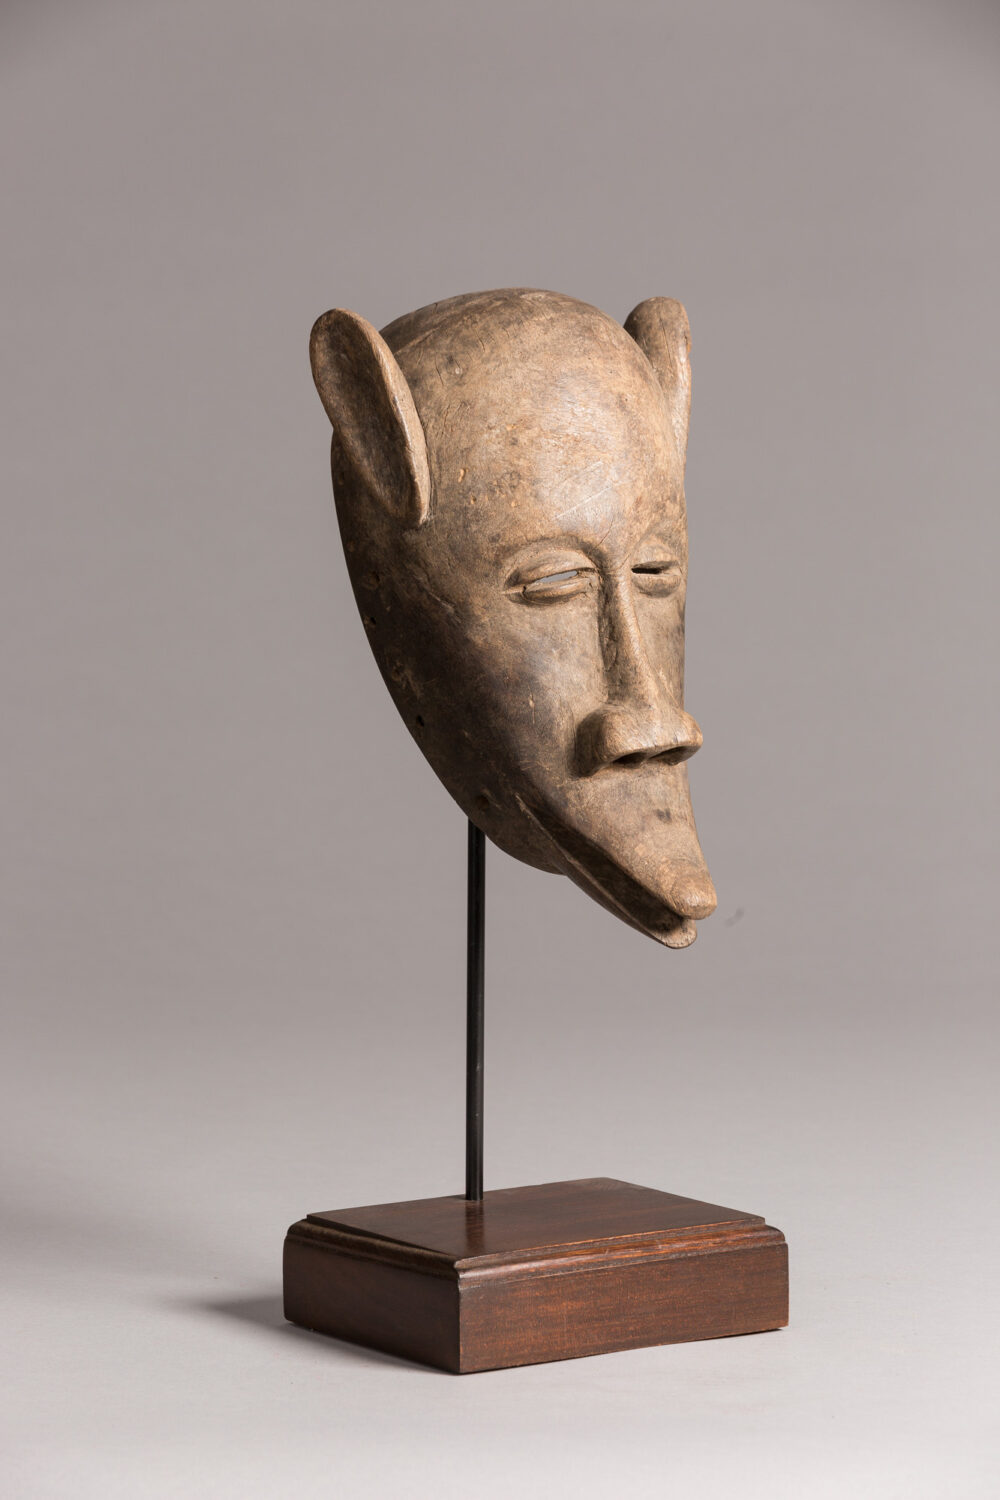 thumbnail of Sculpture of a head